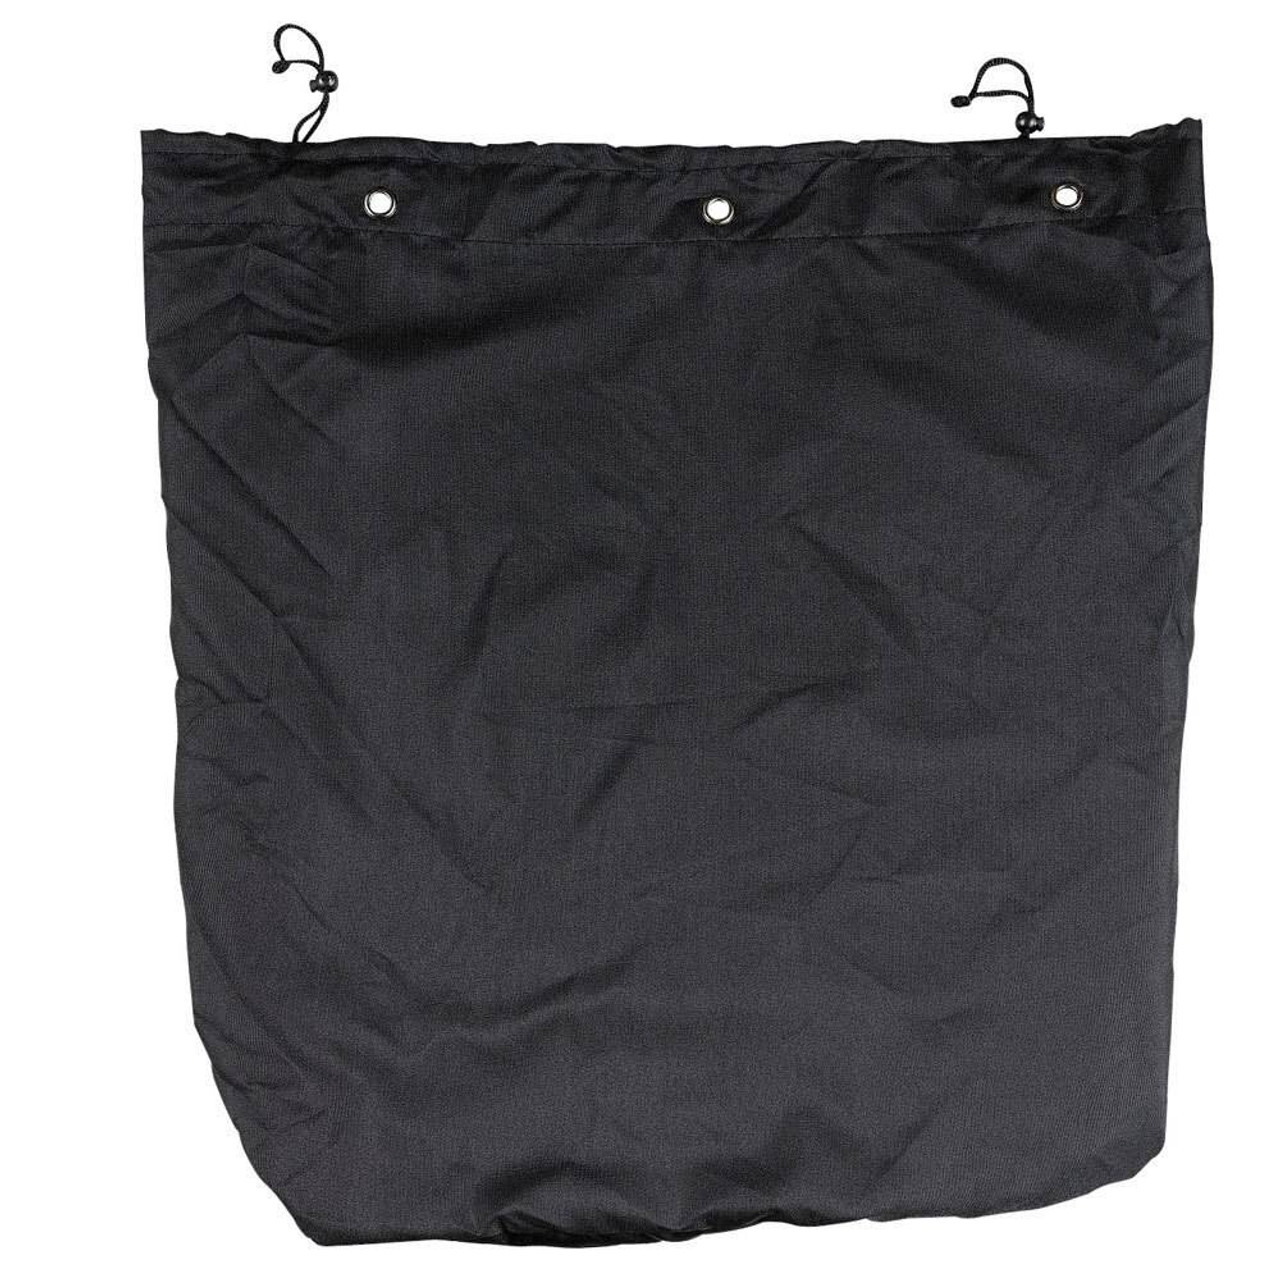 HOSPITALITY 1 SOURCE HOSPITALITY 1 SOURCE or X DUTY LAUNDRY HAMPER or REPLACEMENT BAG or BLACK or 6 PER CASE